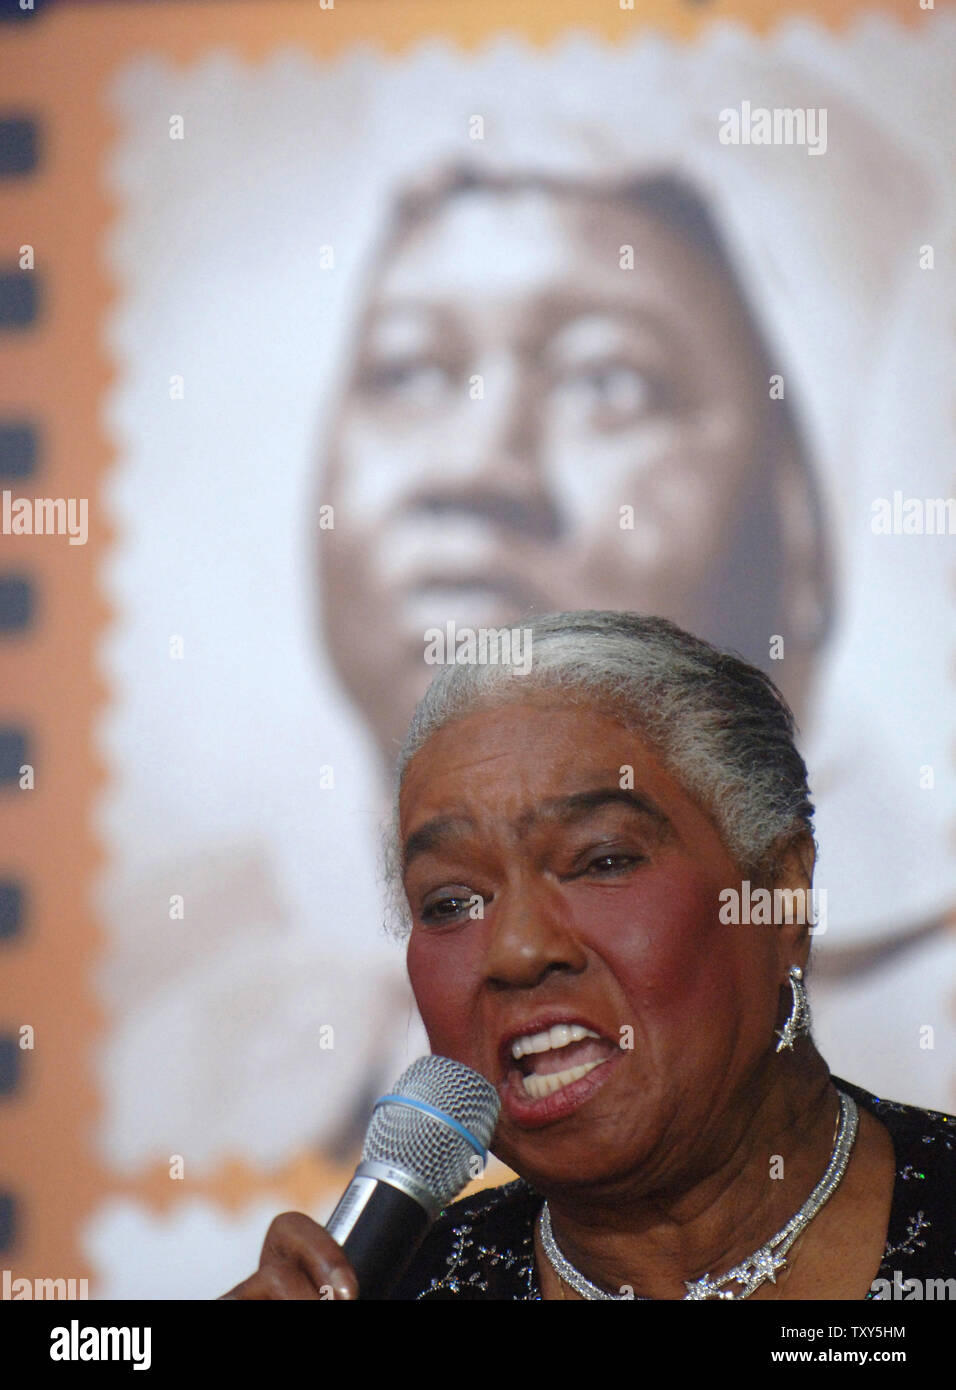 Jazz and Blues singer Linda Hopkins performs at the dedication of a new 39-cent commemorative stamp honoring  Hattie McDaniel held at the The Academy of Motion Picture Arts and Sciences Fairbanks Center for Motion Picture Study in Beverly Hills, California on January 25, 2006. McDaniel became the first African American to win an Academy Award for her role role  in the 1939 film 'Gone With the Wind'. (UPI Photo/ Phil McCarten) Stock Photo